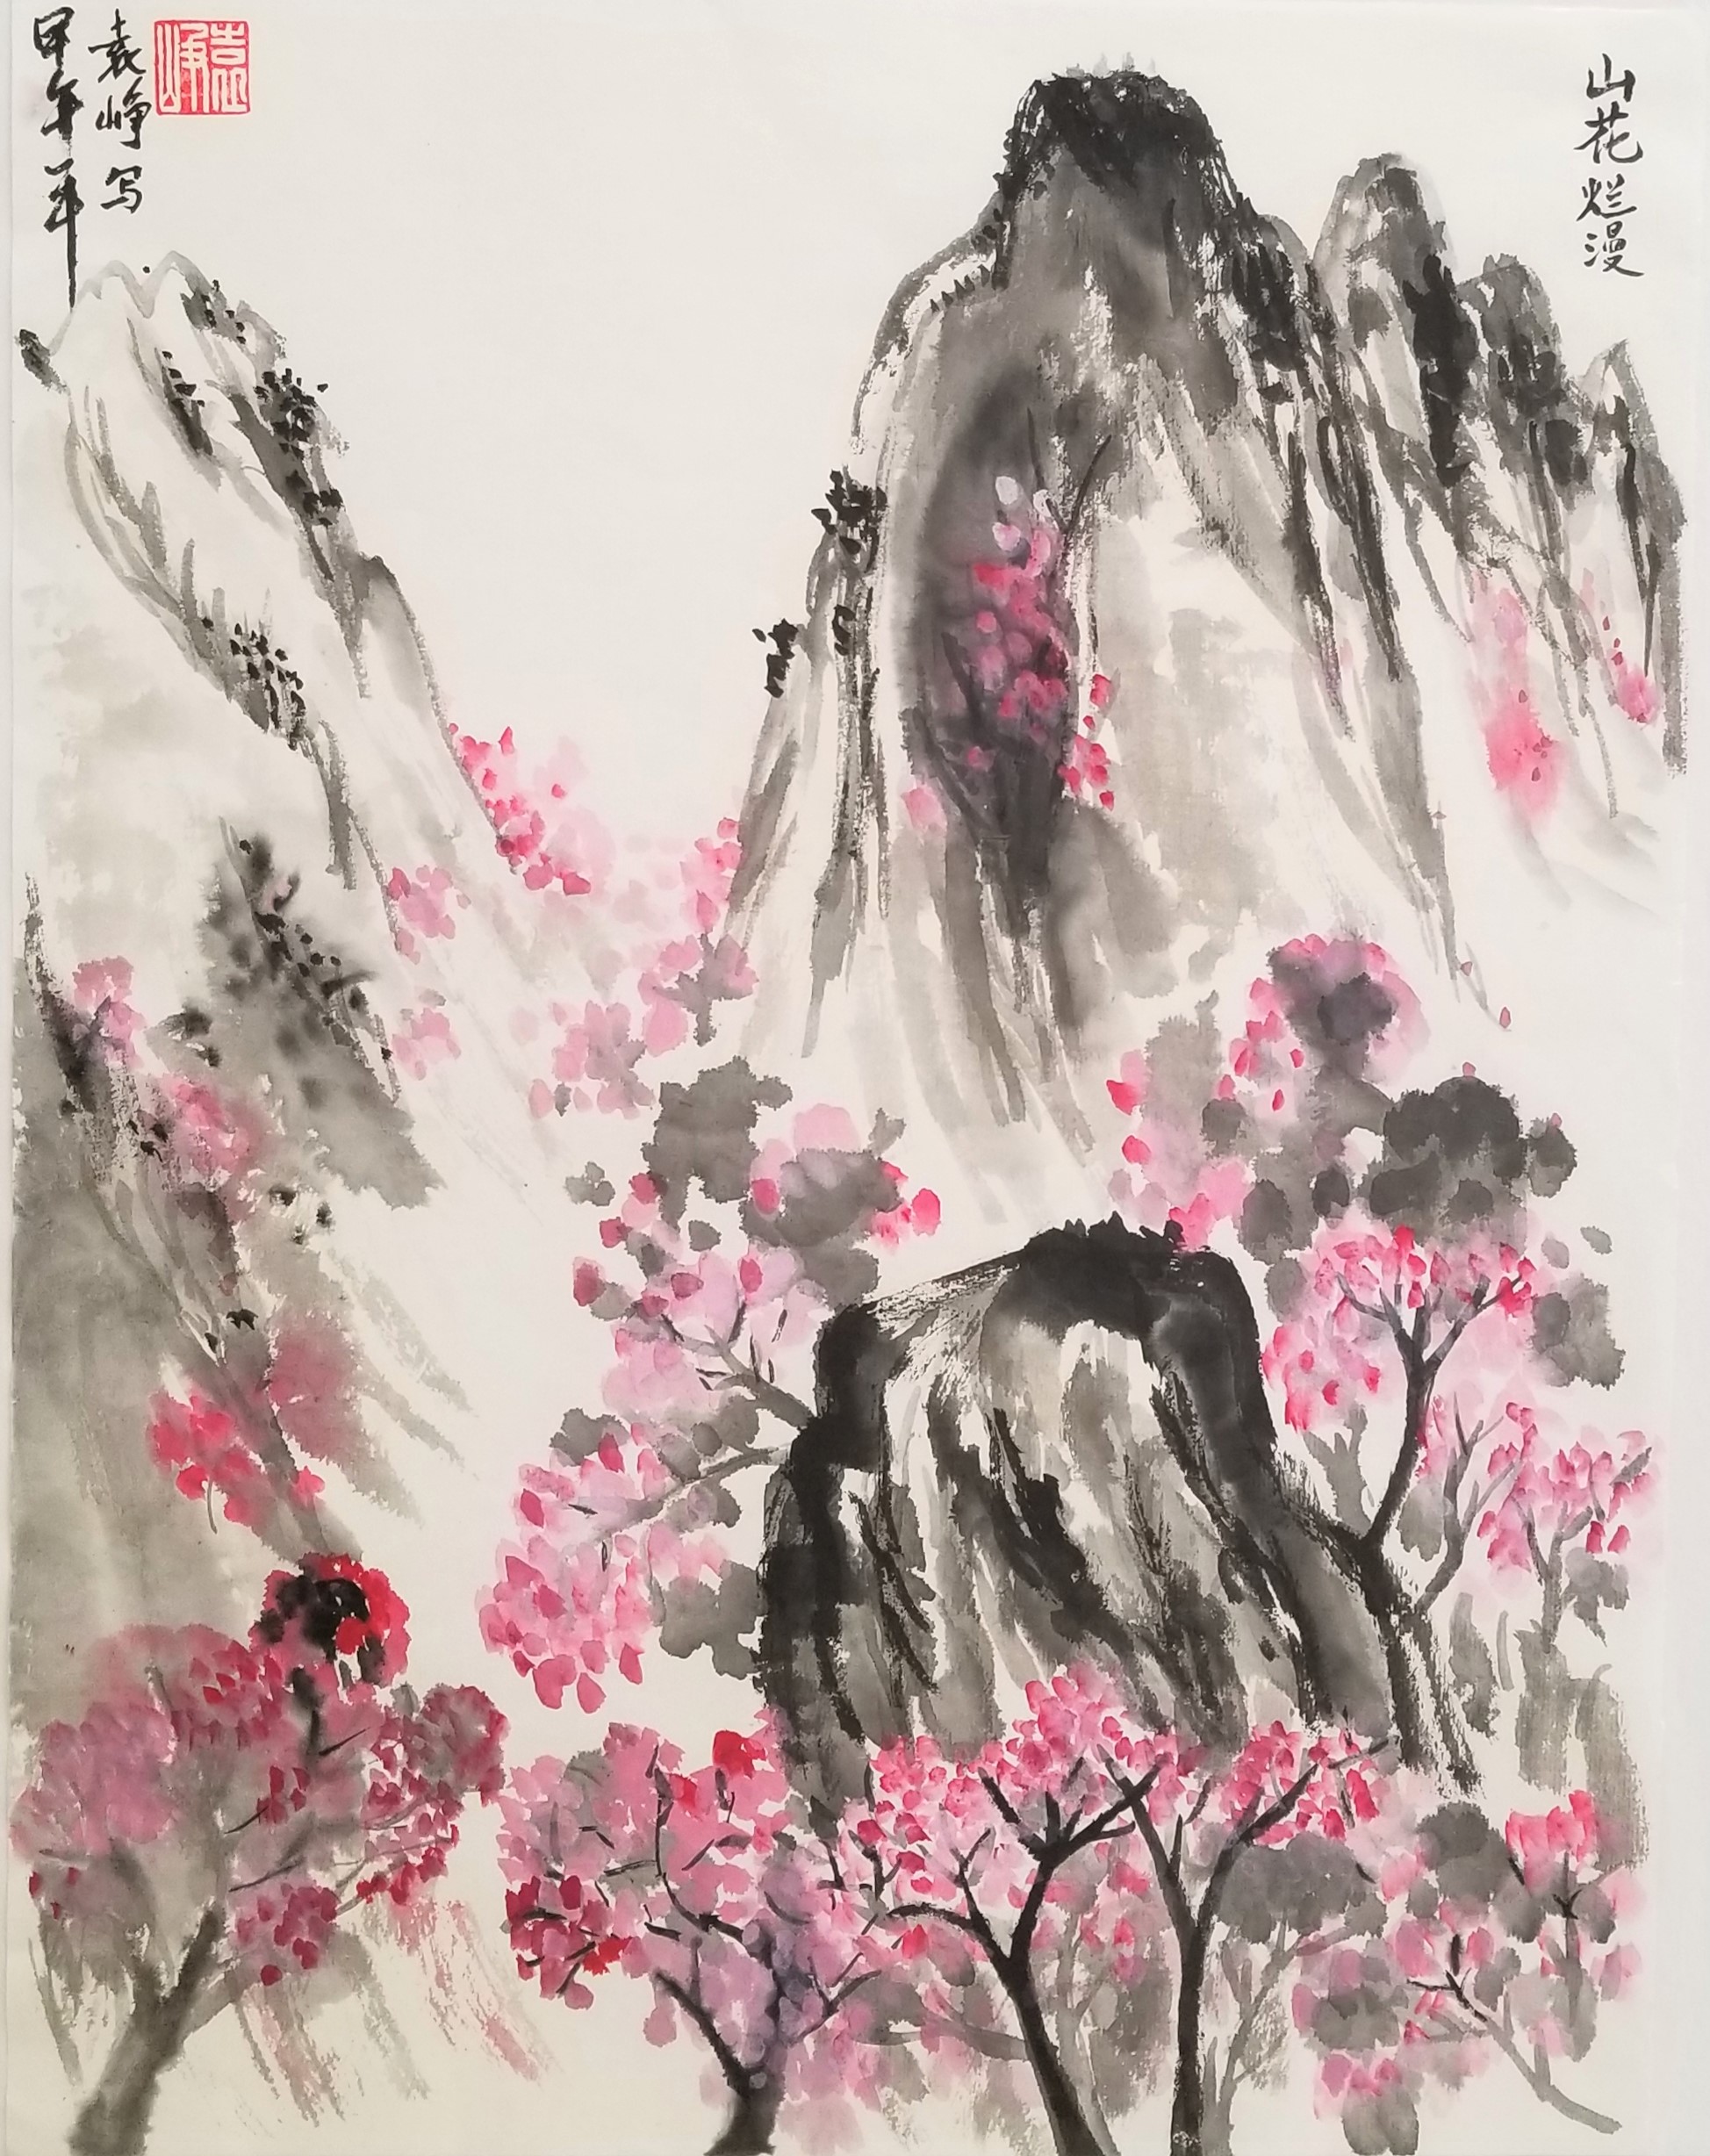 Peach Blossom in the Mountain 山花烂漫